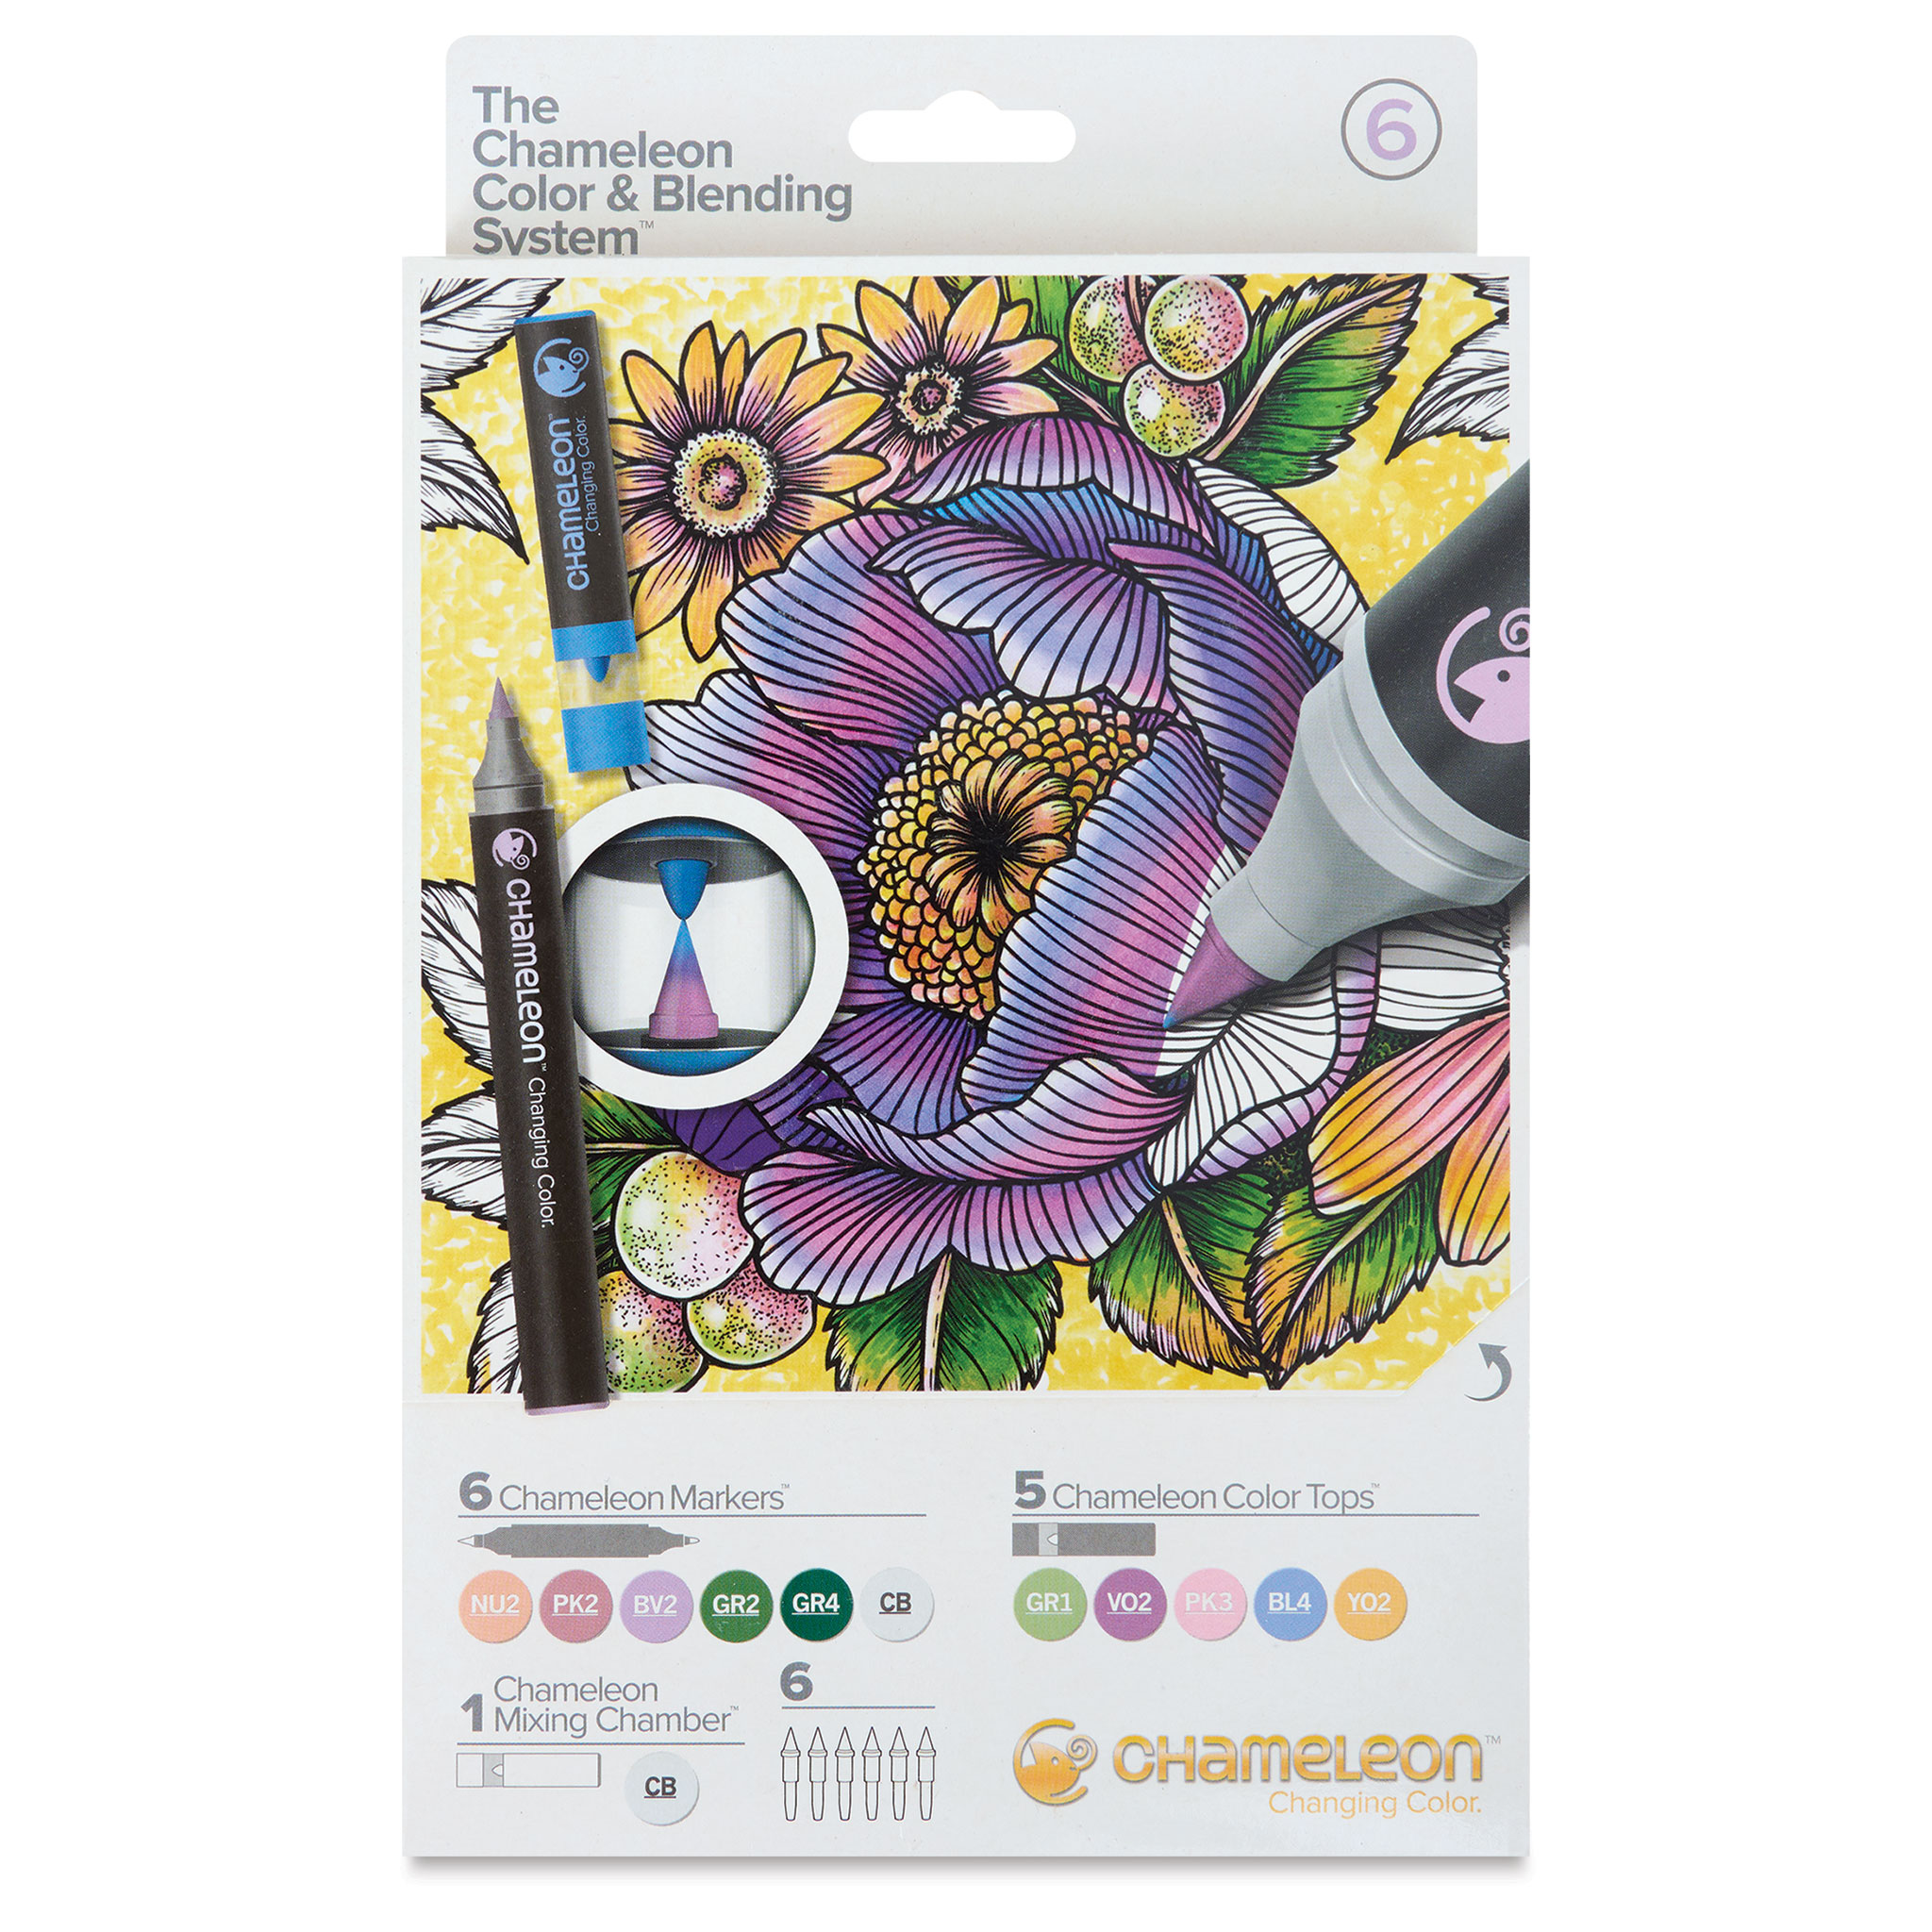 Chameleon Color and Blending System Set 3 with Markers and Color Tops 